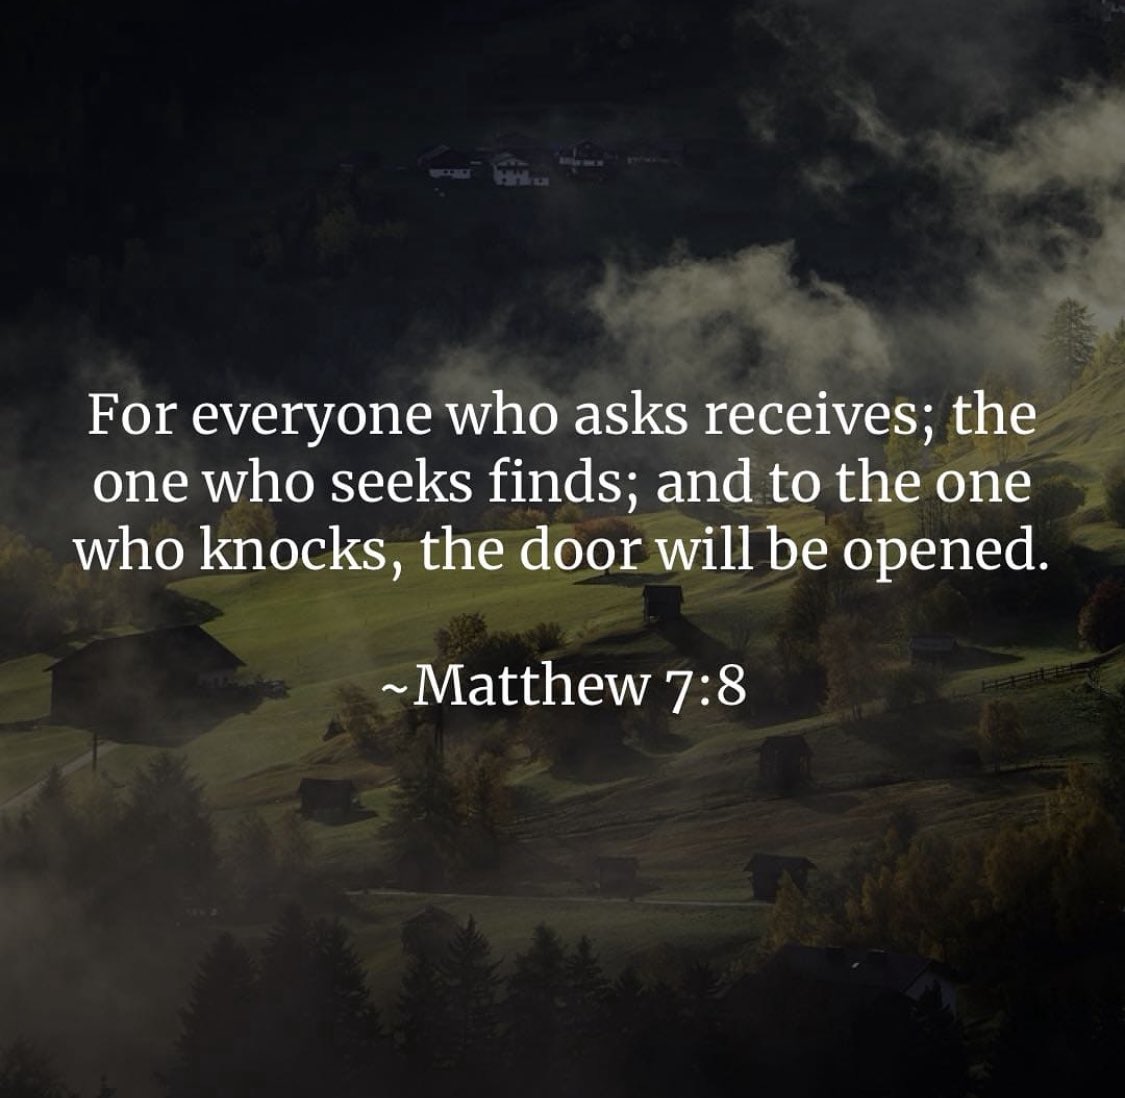 “For everyone who asks receives; he who seeks finds; and to him who knocks, the door will be opened.” Matthew 7:8